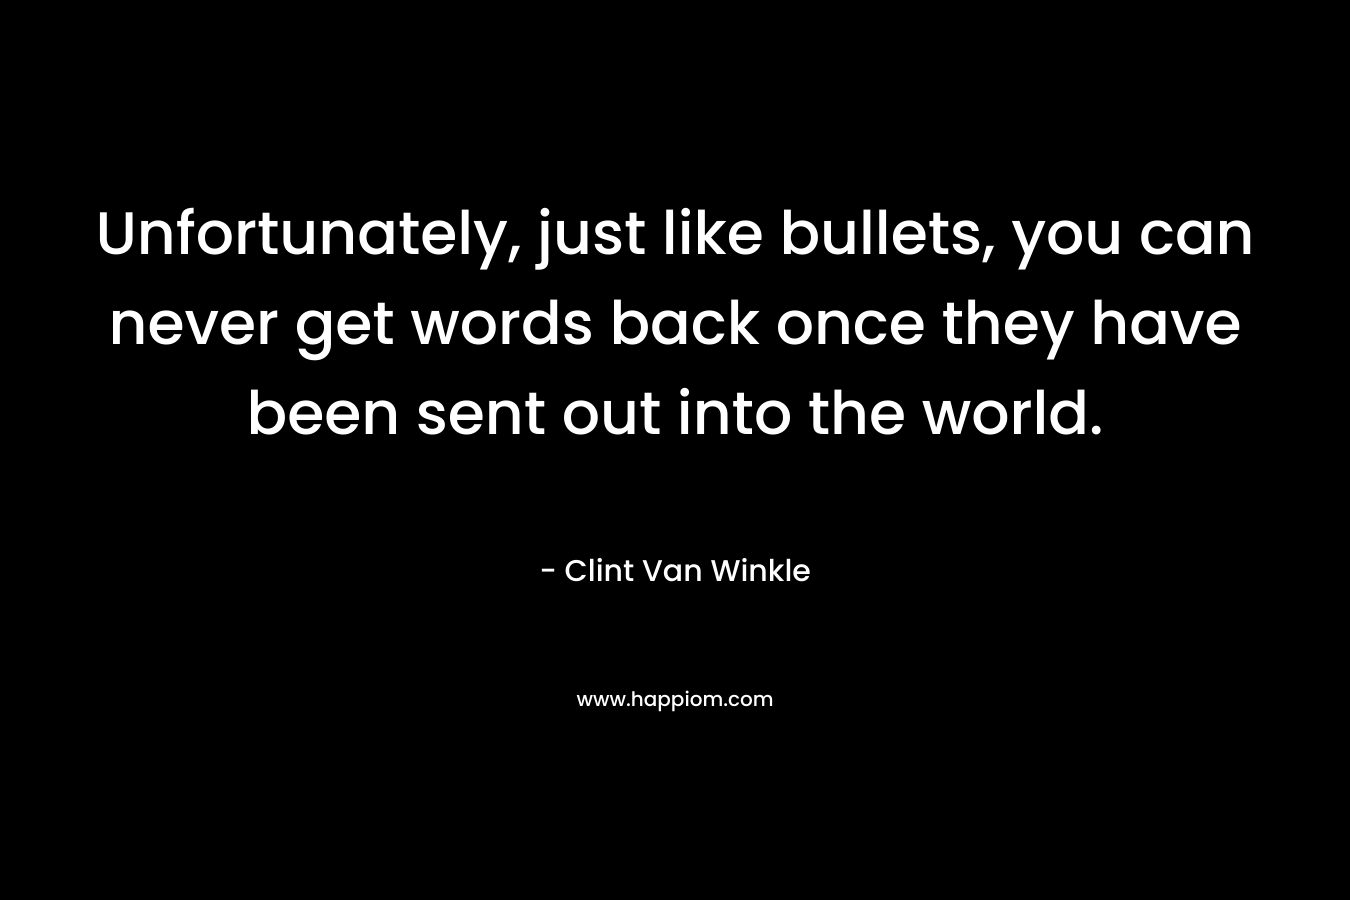 Unfortunately, just like bullets, you can never get words back once they have been sent out into the world. – Clint Van Winkle